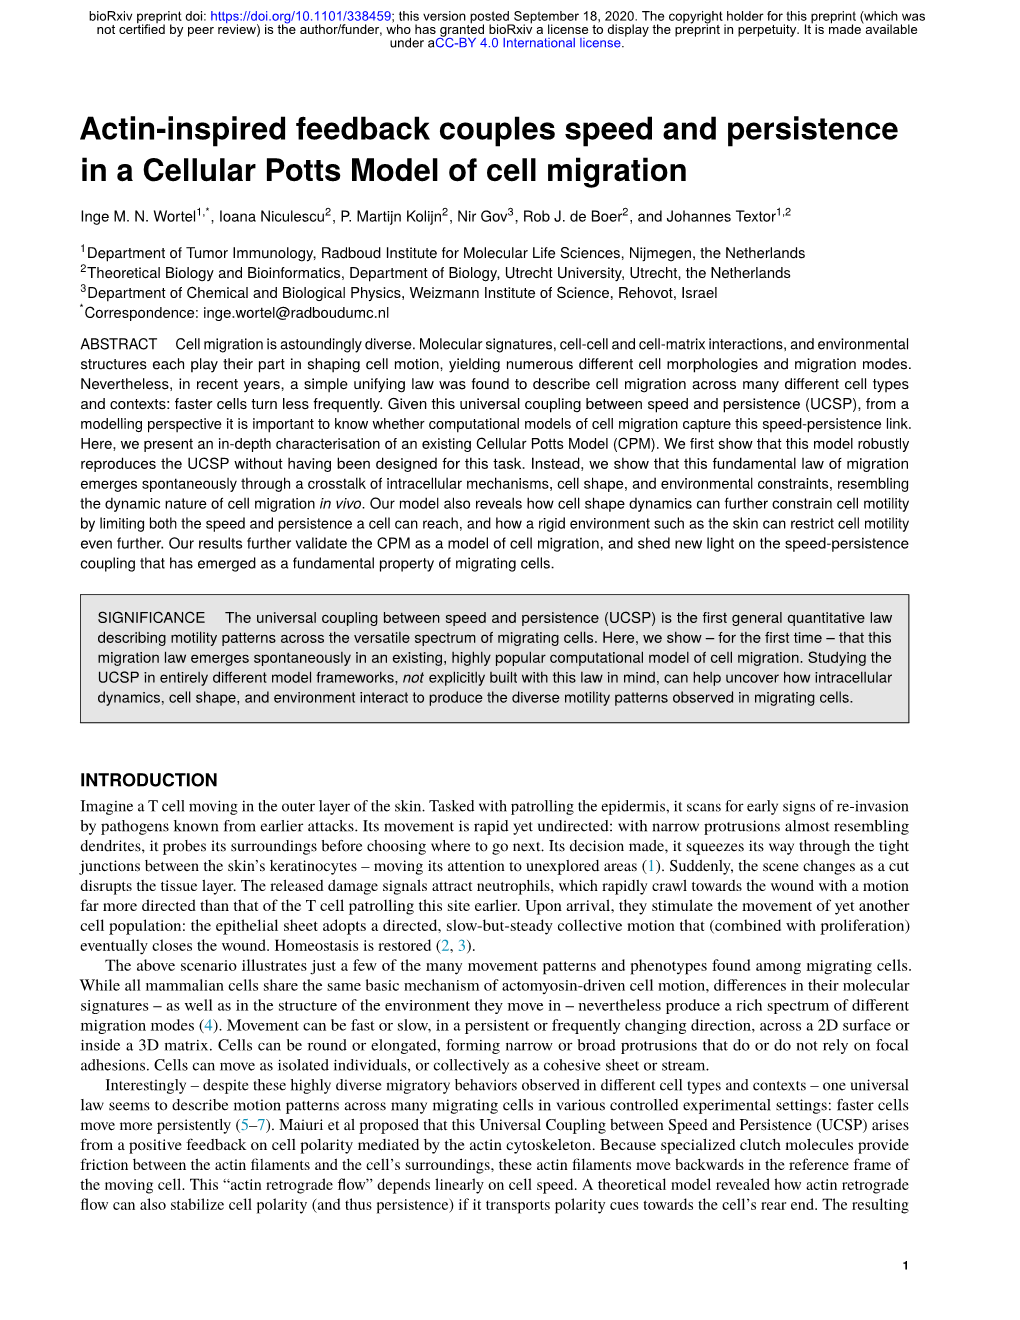 Actin-Inspired Feedback Couples Speed and Persistence in a Cellular Potts Model of Cell Migration